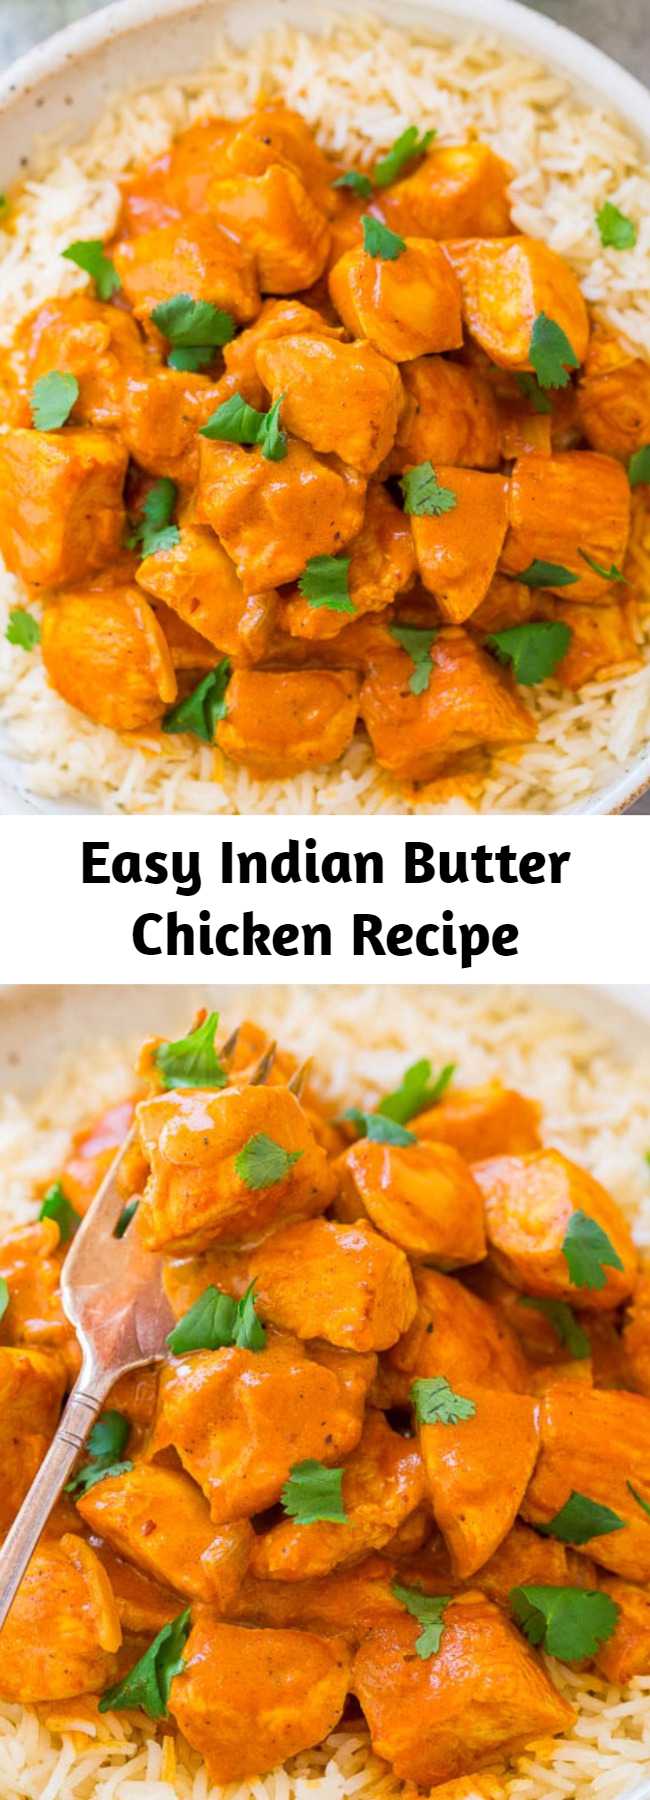 Easy Indian Butter Chicken Recipe - An EASY, ONE-POT recipe for a classic Indian favorite!! Juicy, BUTTERY chicken simmered in a CREAMY tomato-based sauce! Next time you're craving Indian food, you can make it yourself in 30 minutes!!